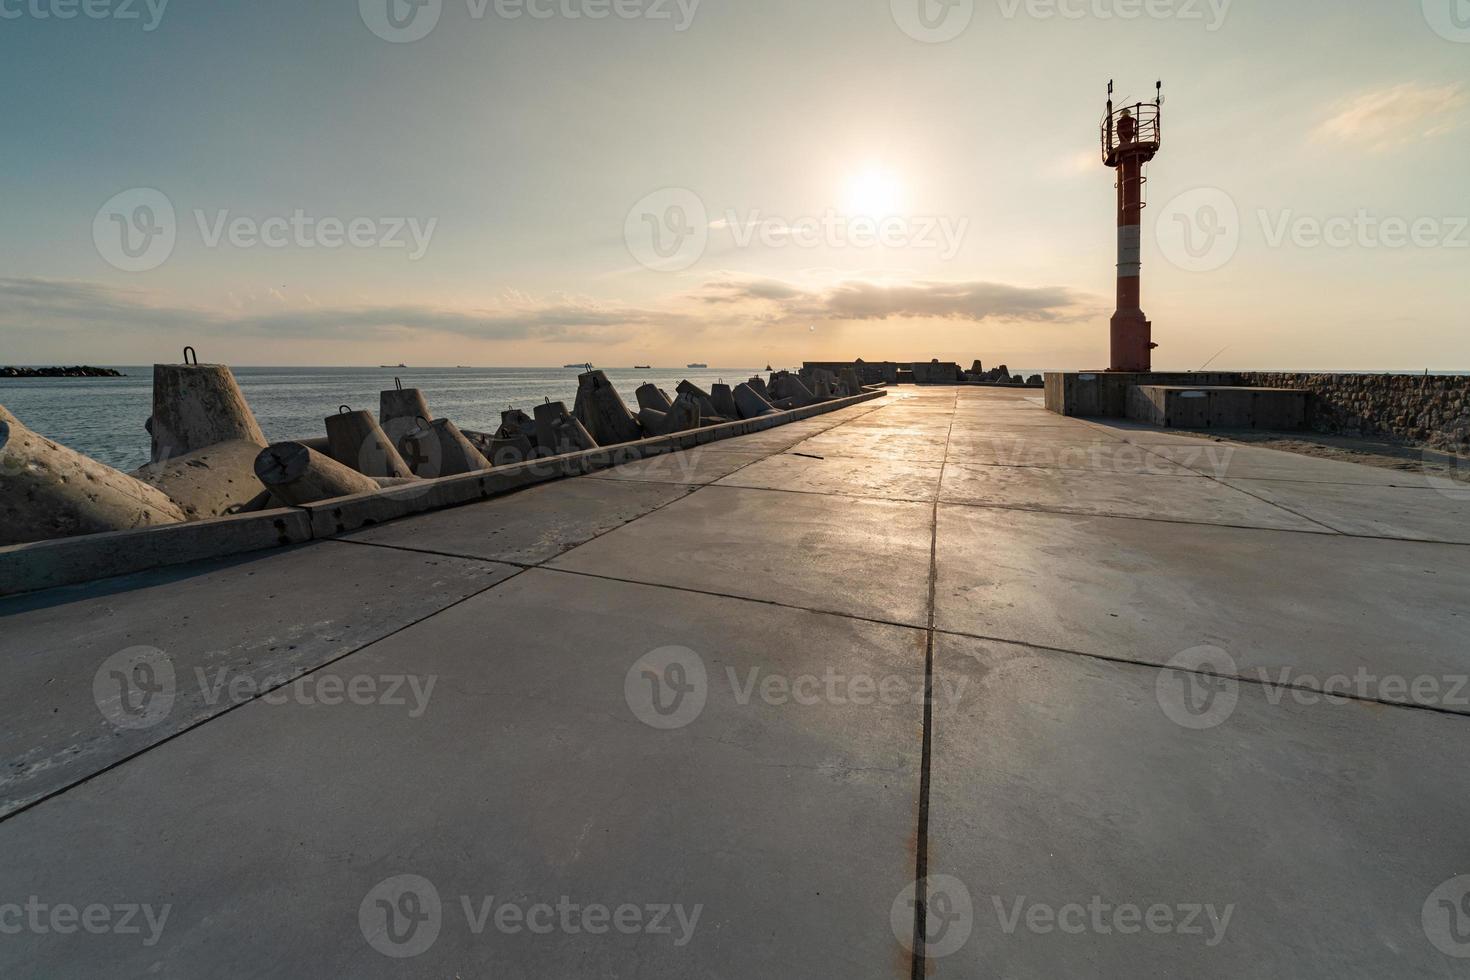 North pier with breakwaters, sunset seascape. Modern lighthouse in sunlight. Tetrapods along edges of pier. Beautiful evening seascape. photo